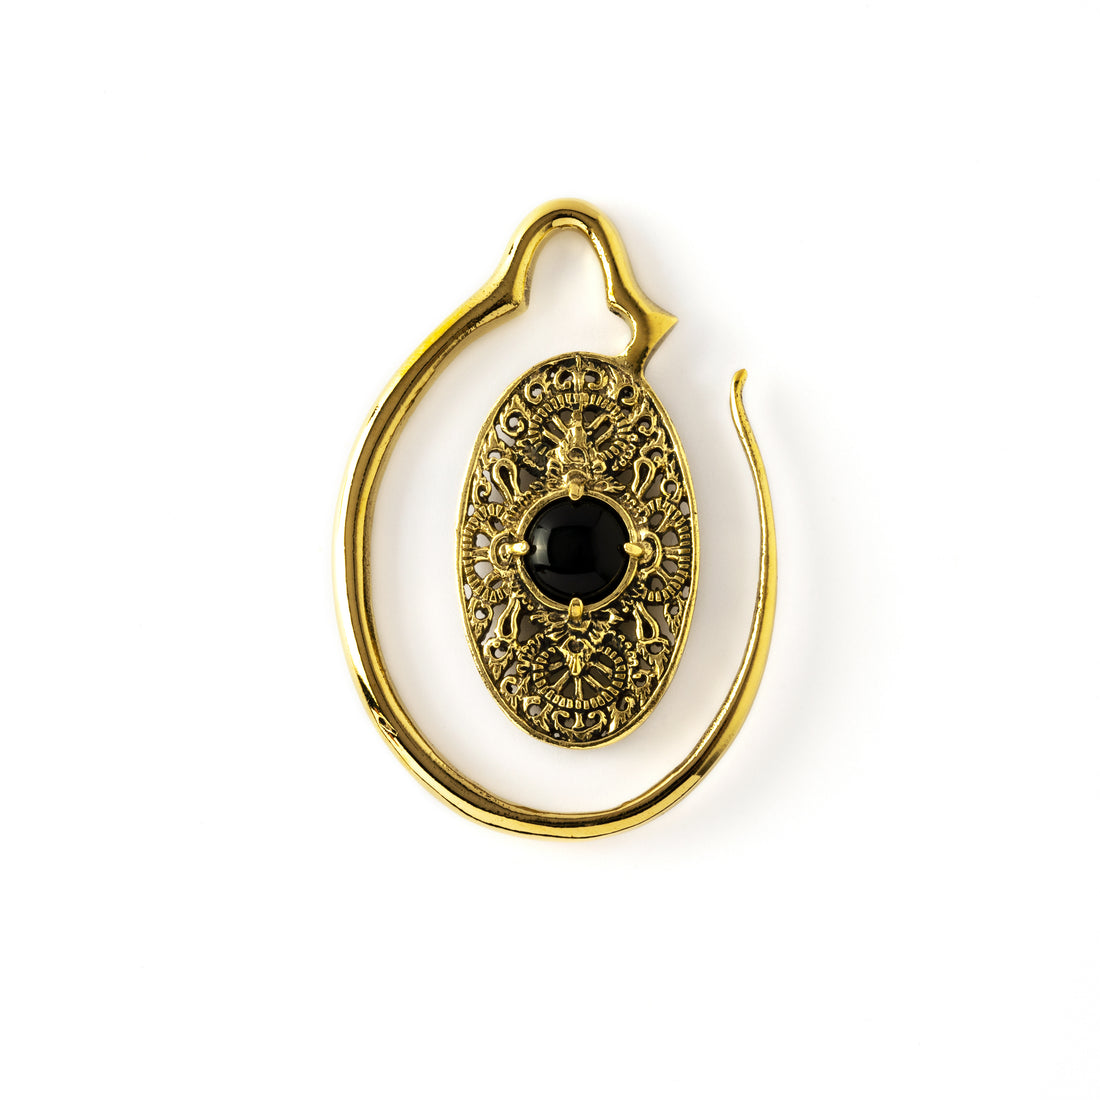 single golden large ear weights hangers oval shaped with intricate filigree pattern an black onyx